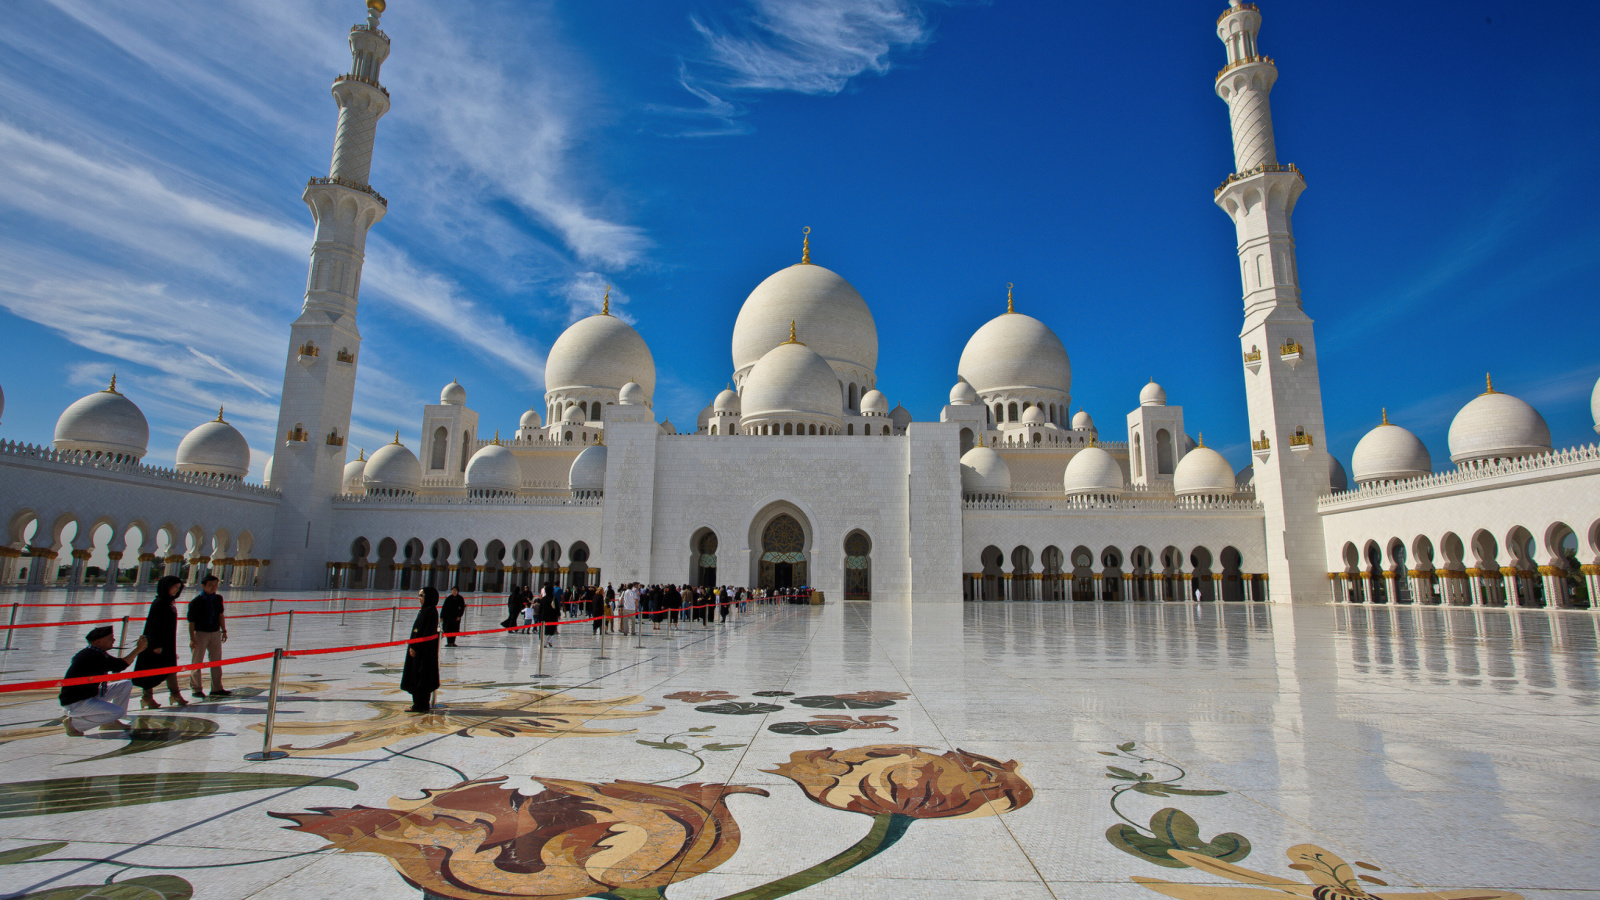 Sheikh Zayed Mosque located in Abu Dhabi wallpaper 1600x900